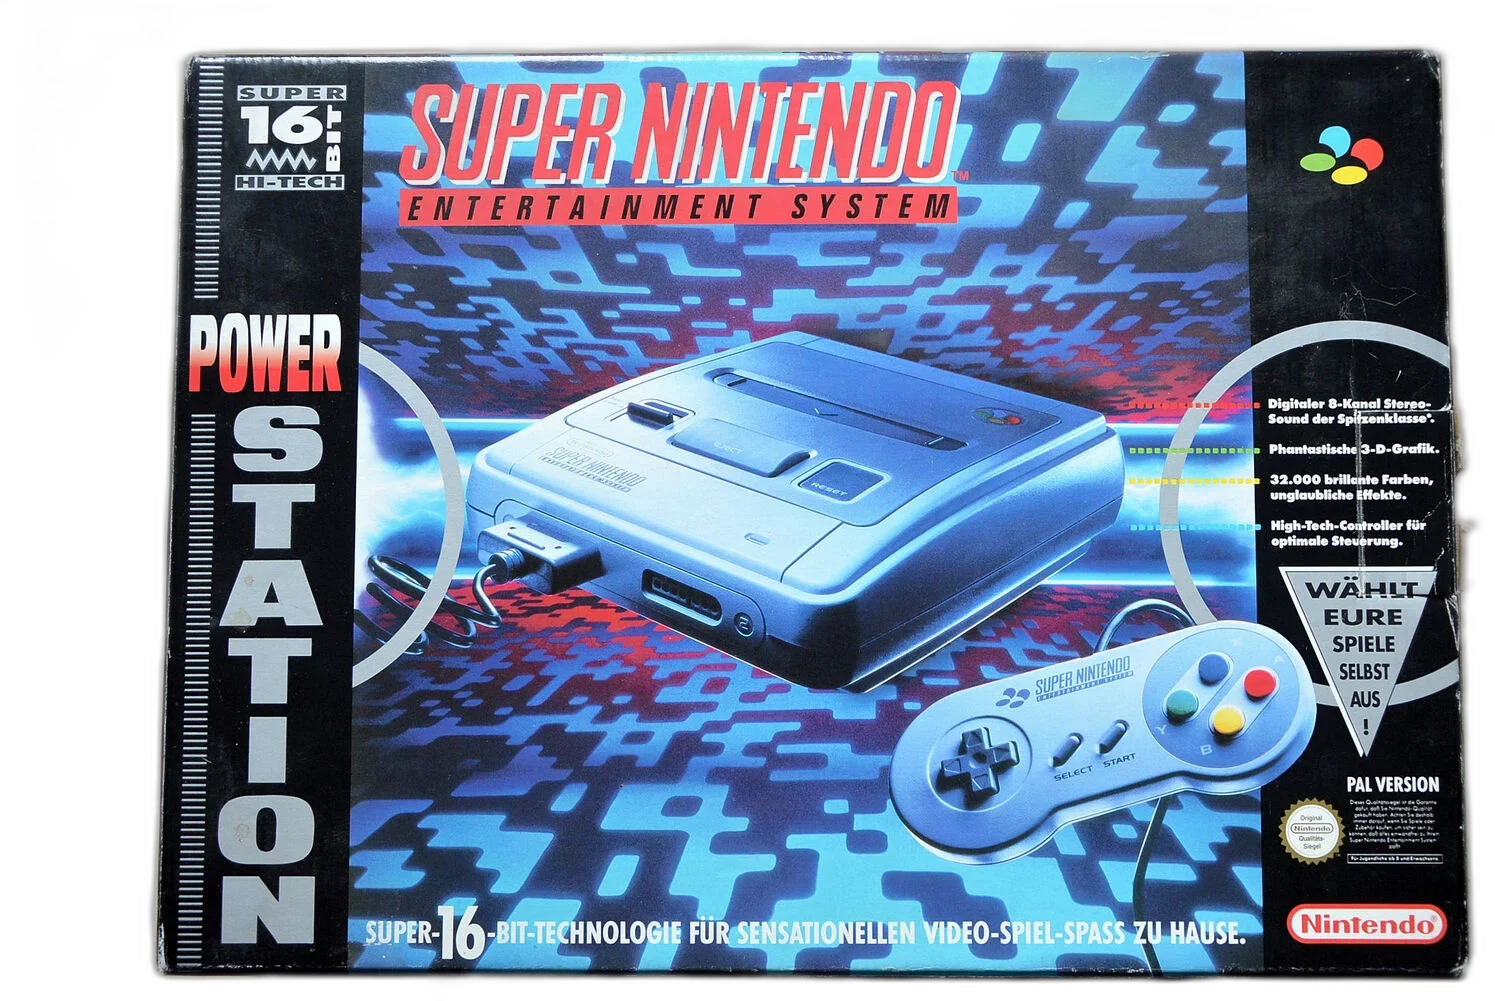  SNES Power Station Console